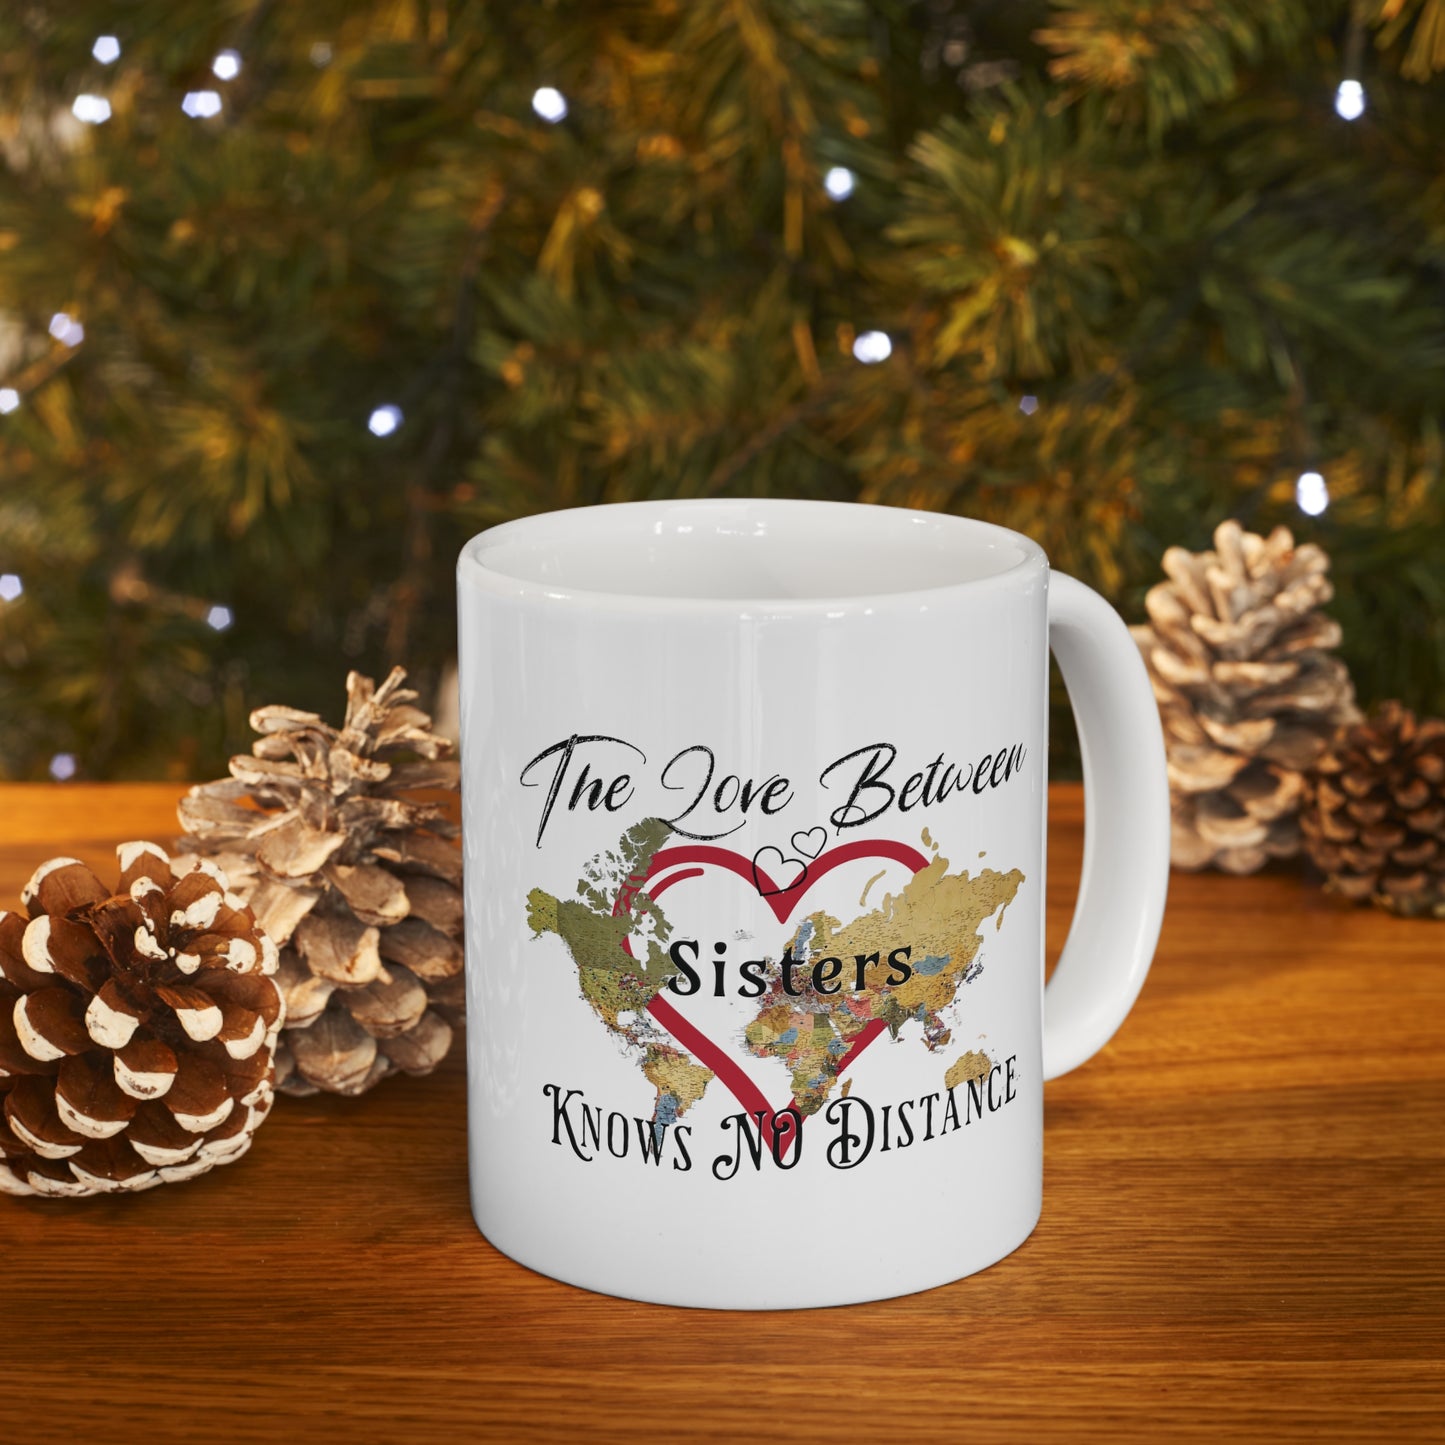 The love between sisters knows no distance - Ceramic Mug 11oz